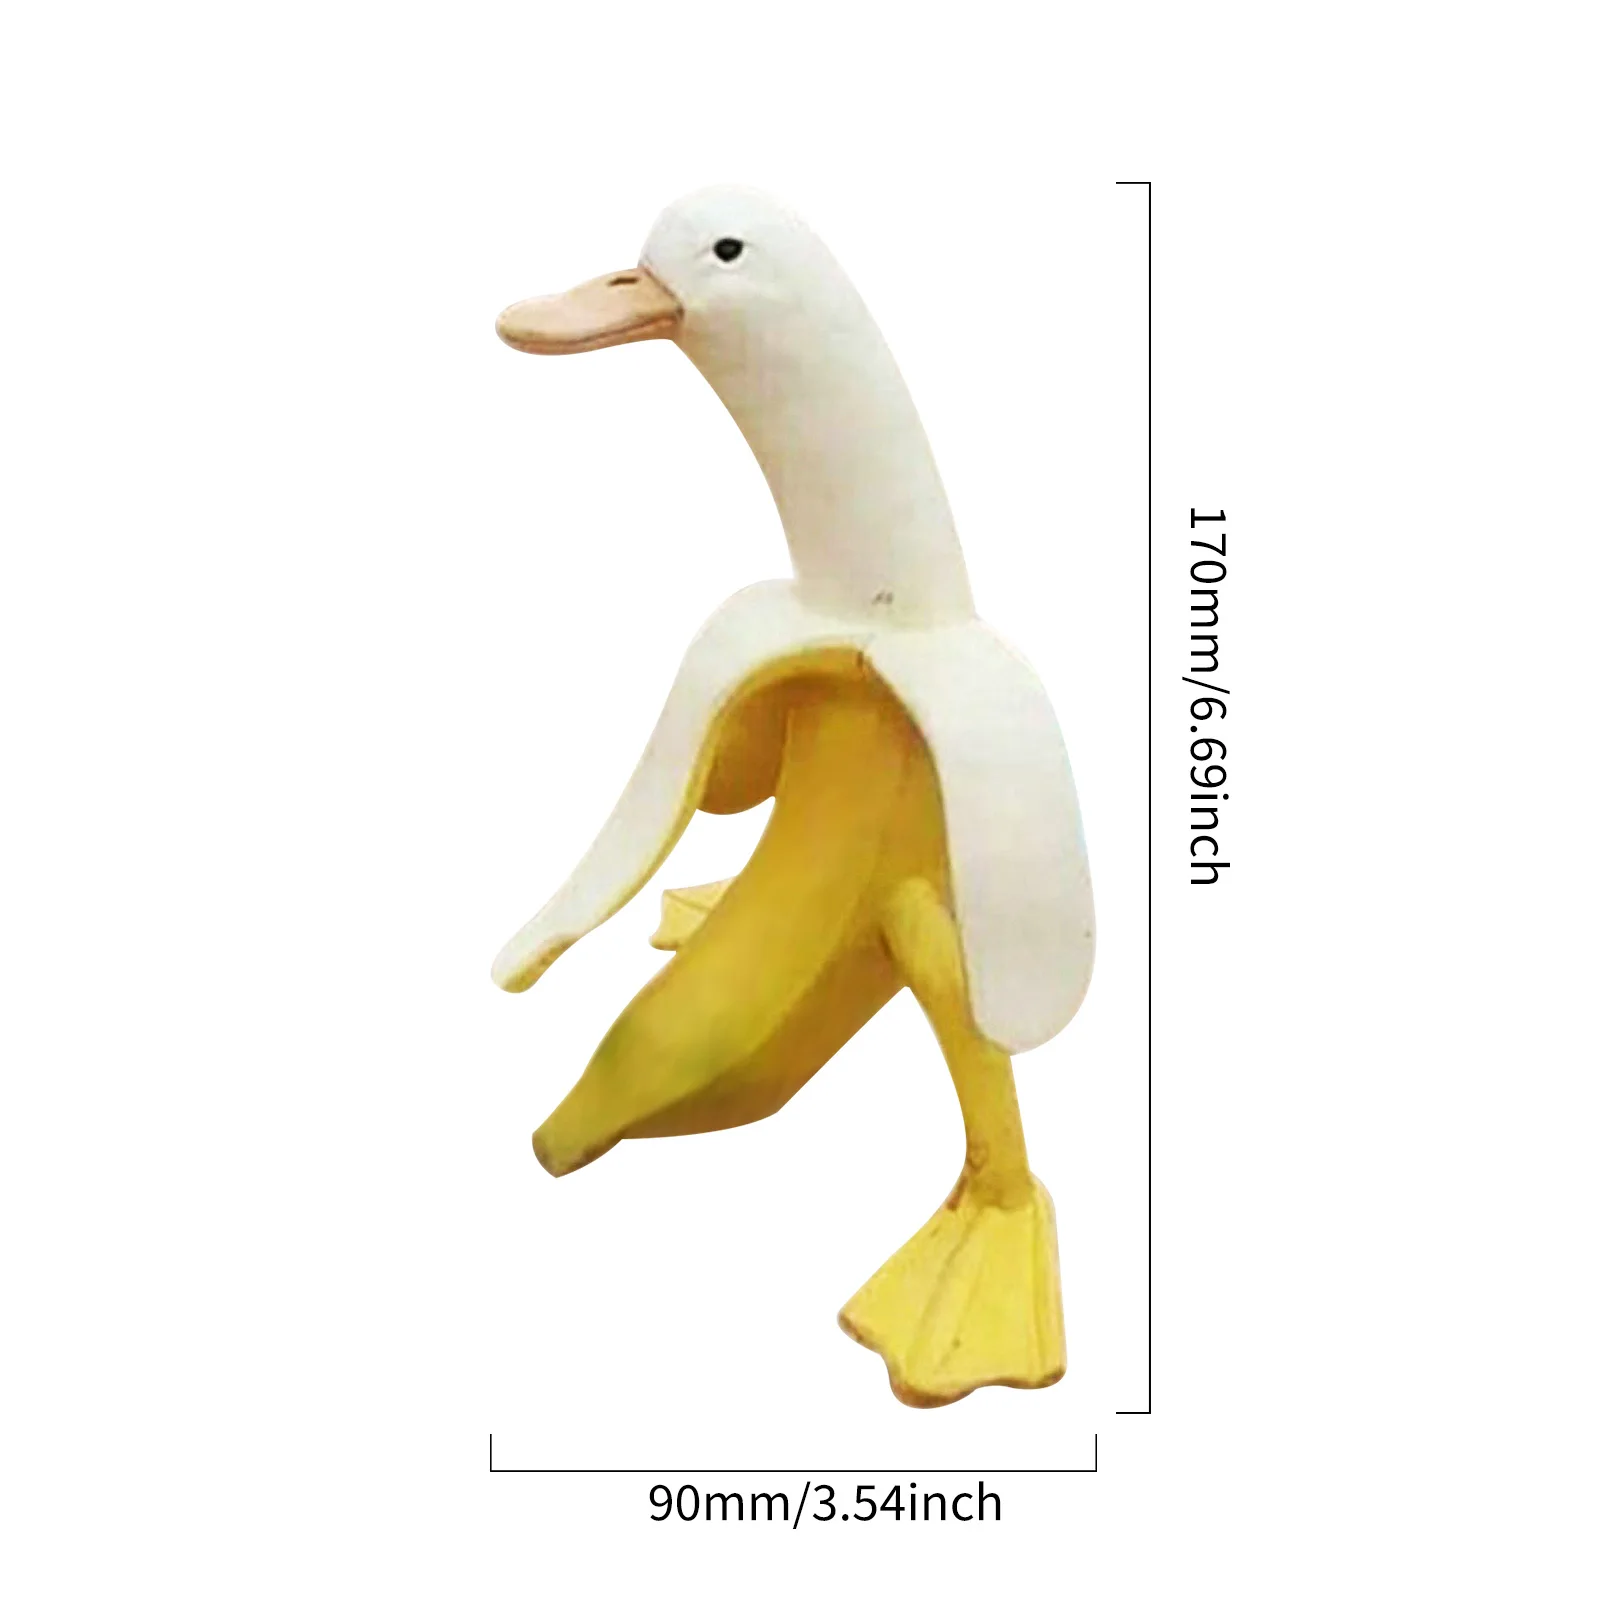 Banana Duck Art Statue, Garden Yard Outdoor Decor, Cute Funny Whimsical Peeled Banana Duck Figurines Decoration Ornaments images - 6